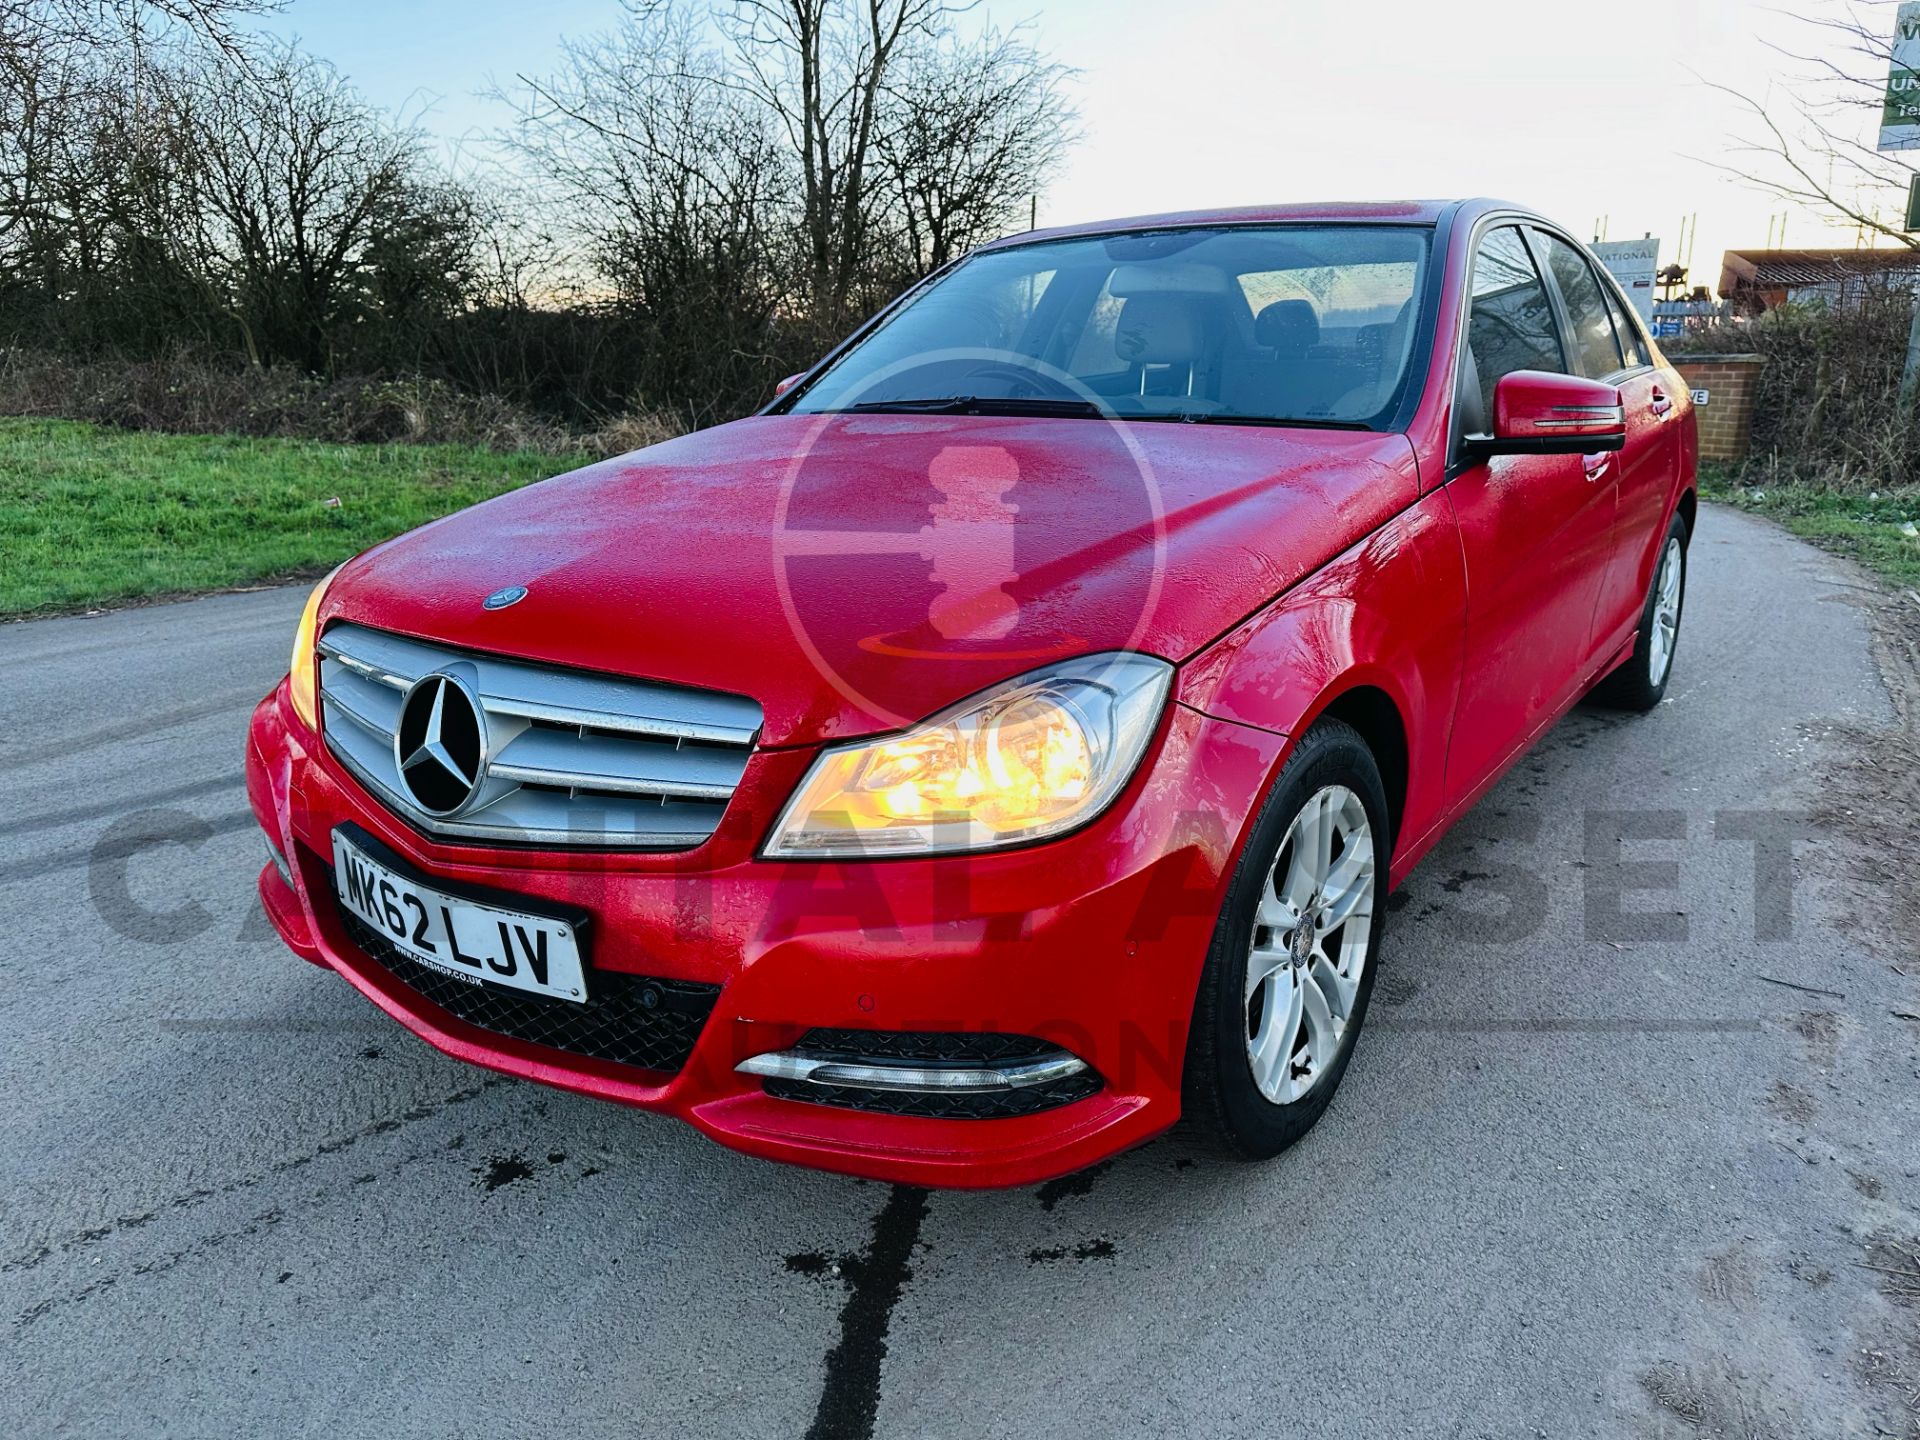 (ON SALE) MERCEDES-BENZ C220 2.1Cdi BLUE EFFICIENCY STOP/START FULL LEATHER INTERIOR NO VAT - Image 4 of 32